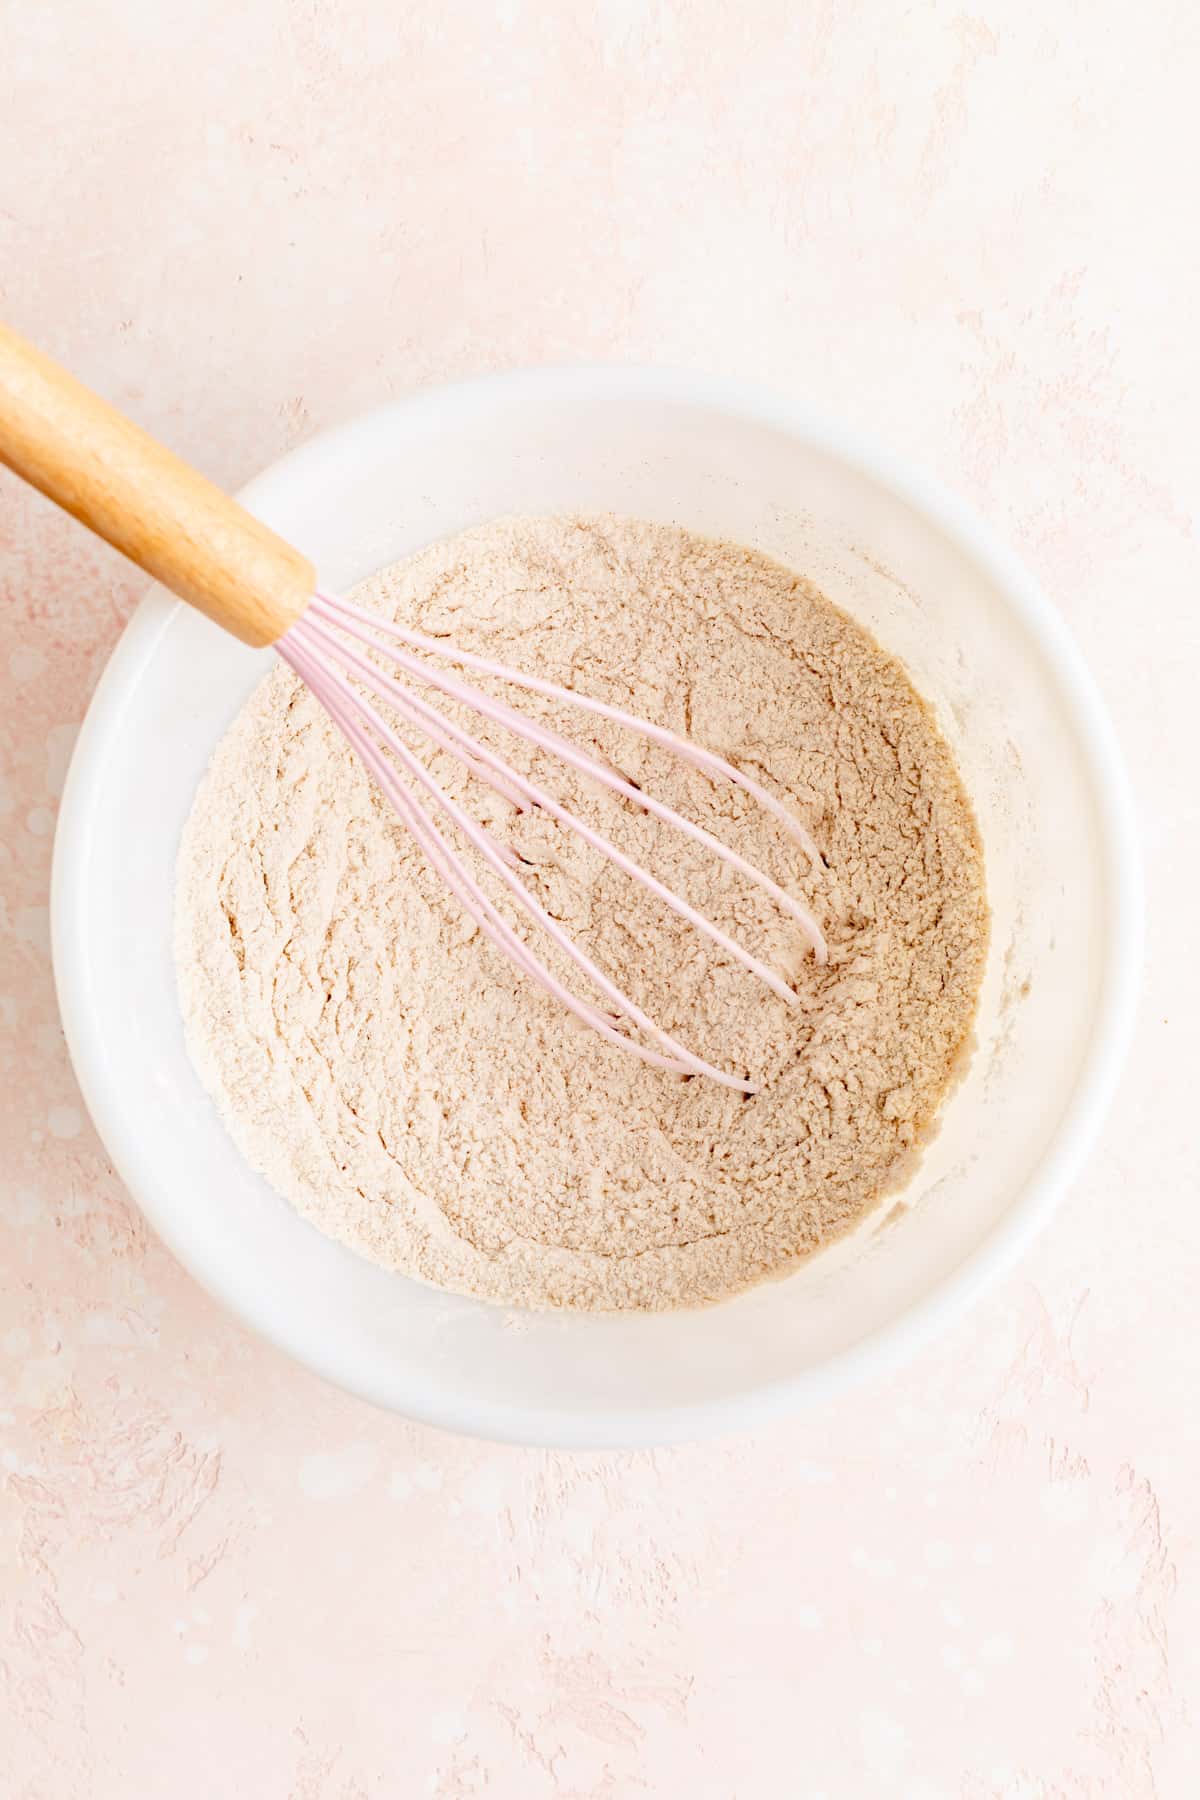 Dry ingredients for cinnamon pancakes in white ball with pink and wood whisk.